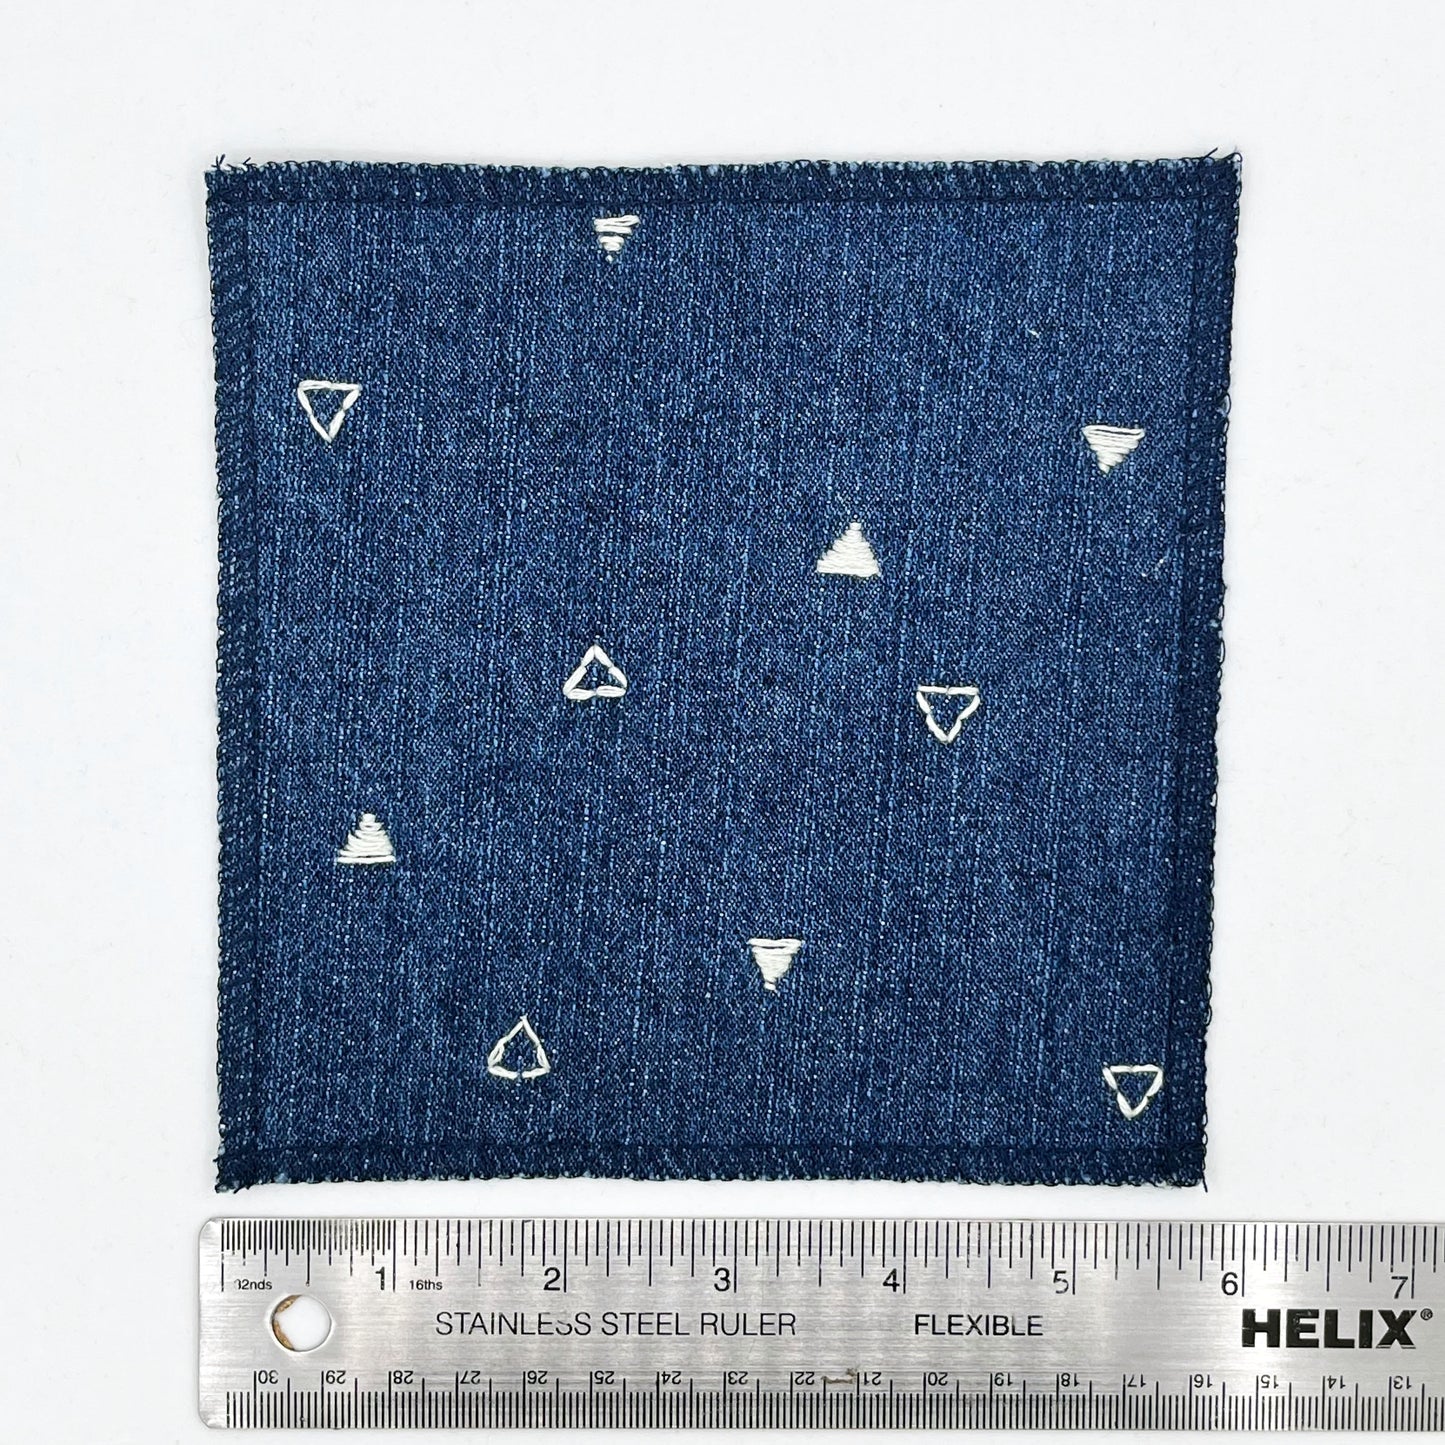 a square patch made out of denim, handstitched with scattered ivory triangles, some as outlines some with a line fill, with overlocked edges, on a white background, next to a ruler showing a width of 6 inches